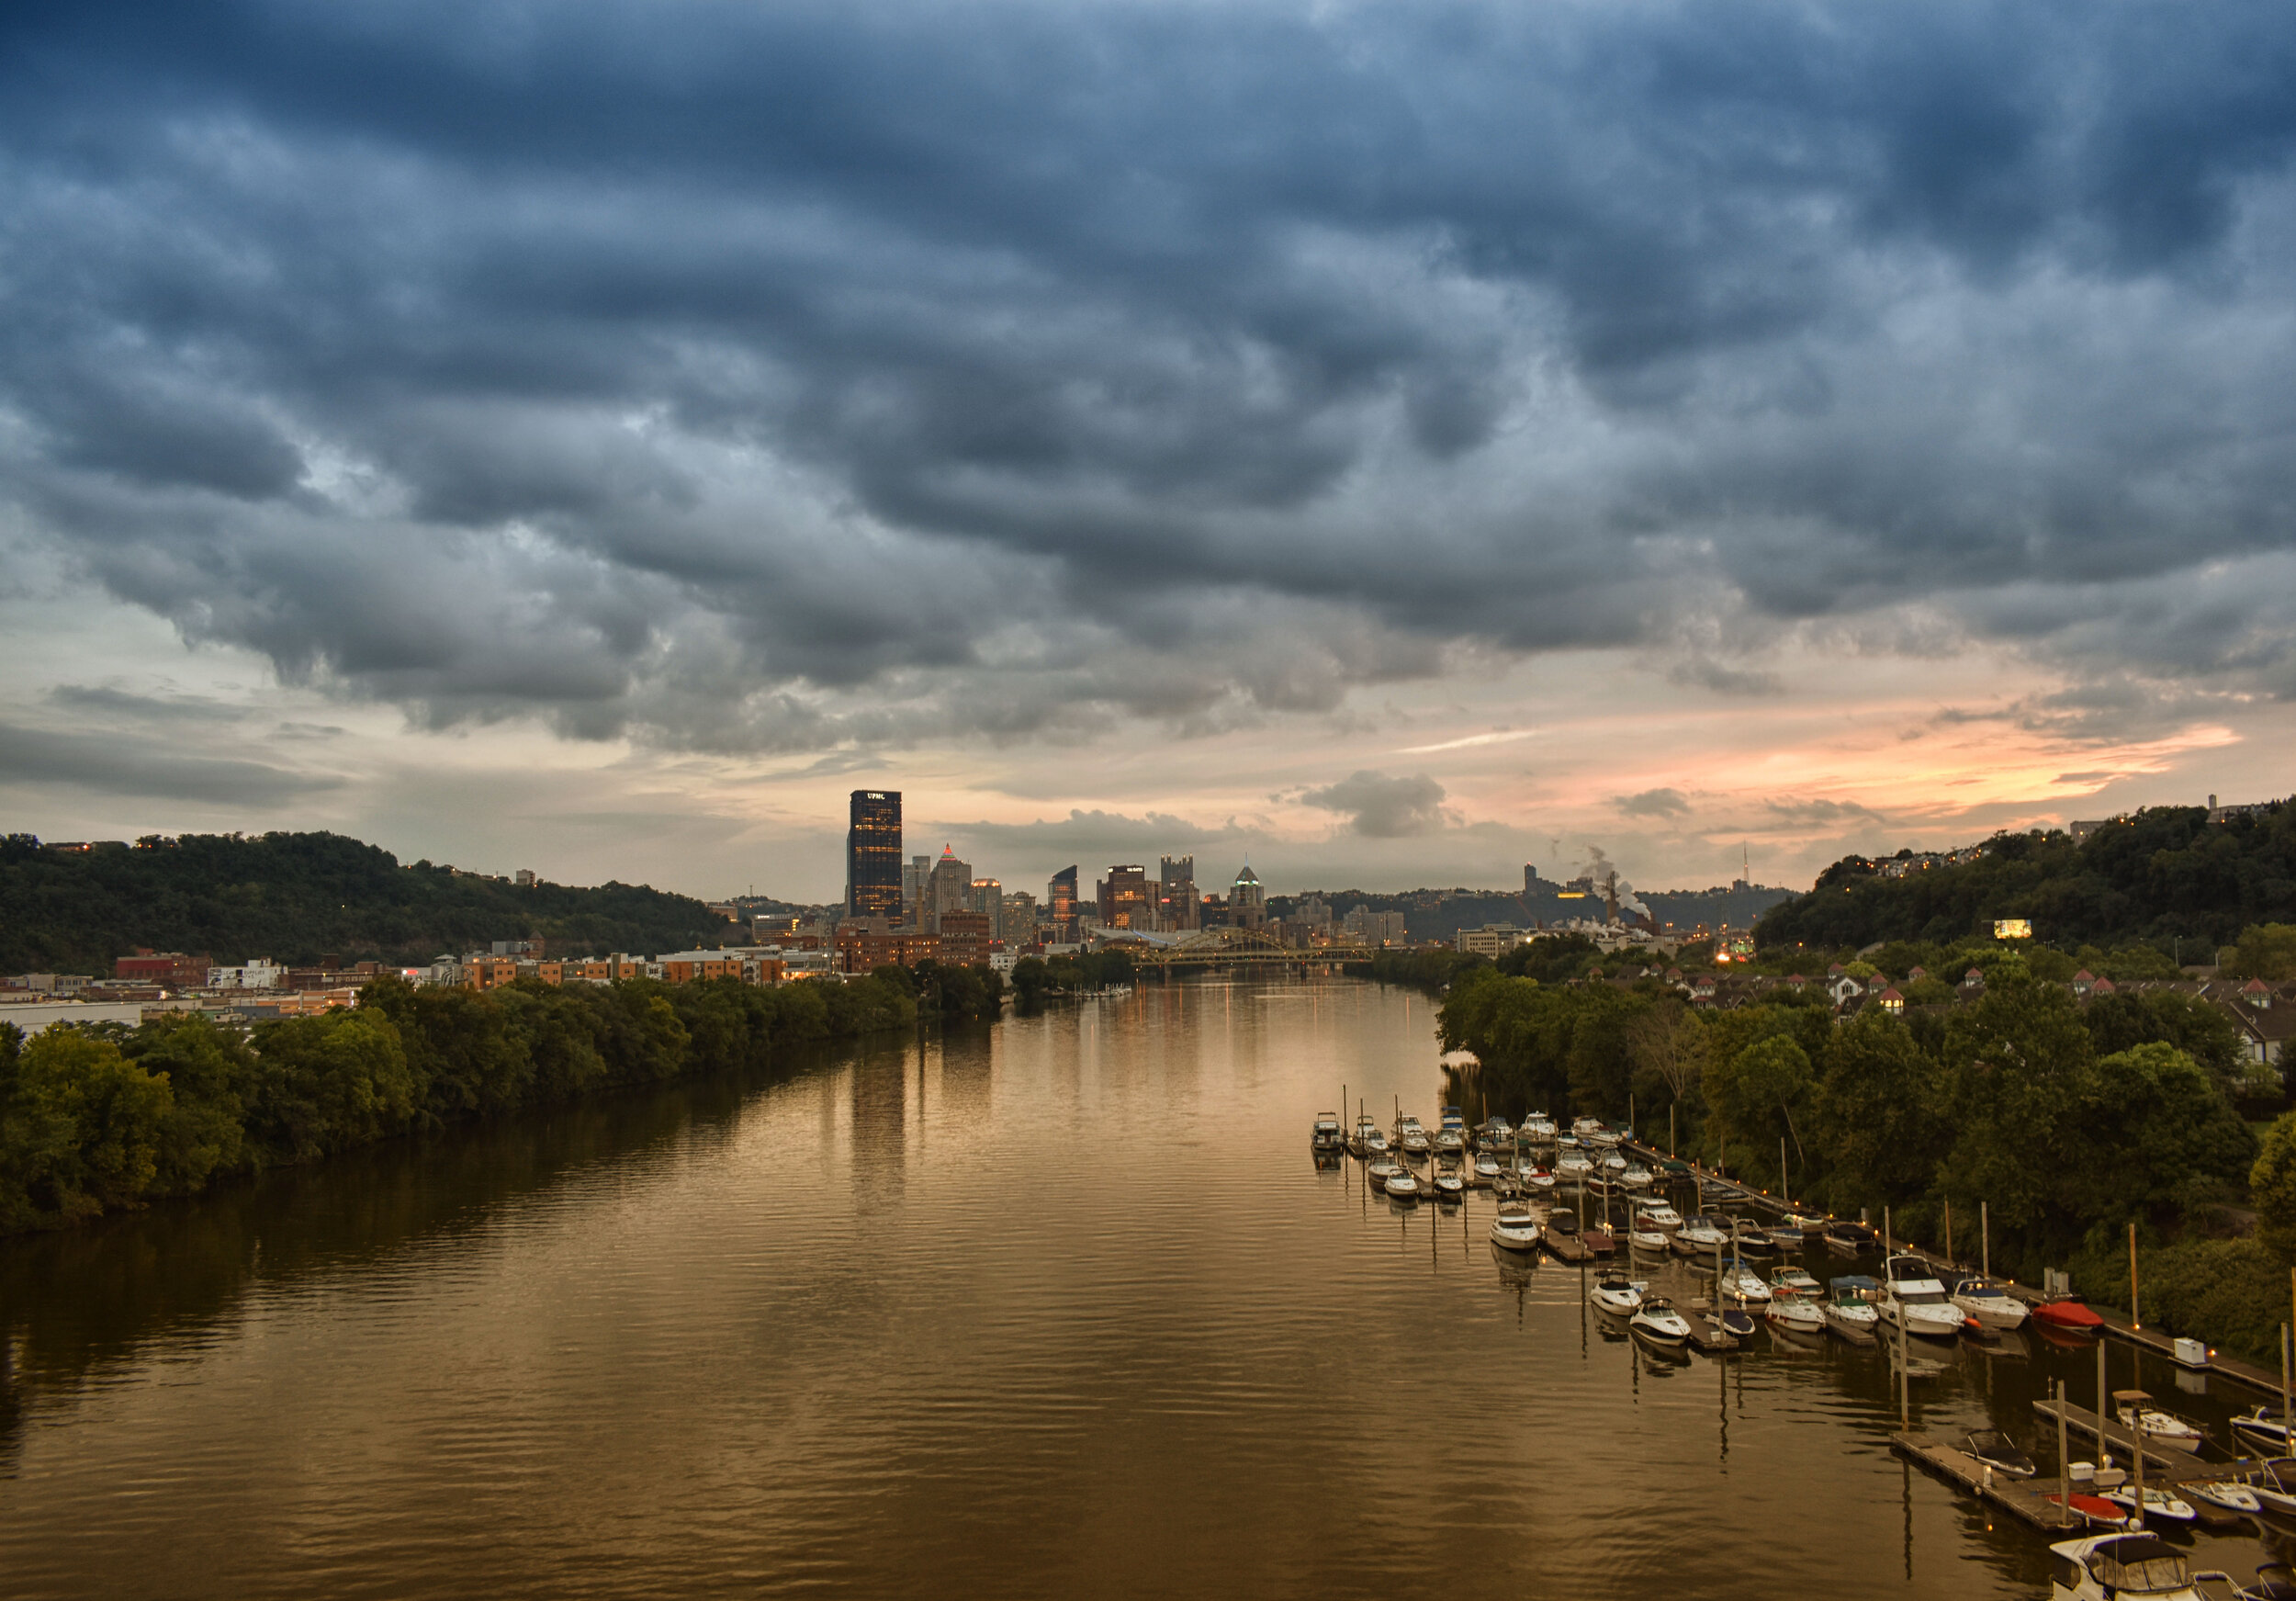 "View from the 31st Street Bridge" by EB Photography PGH